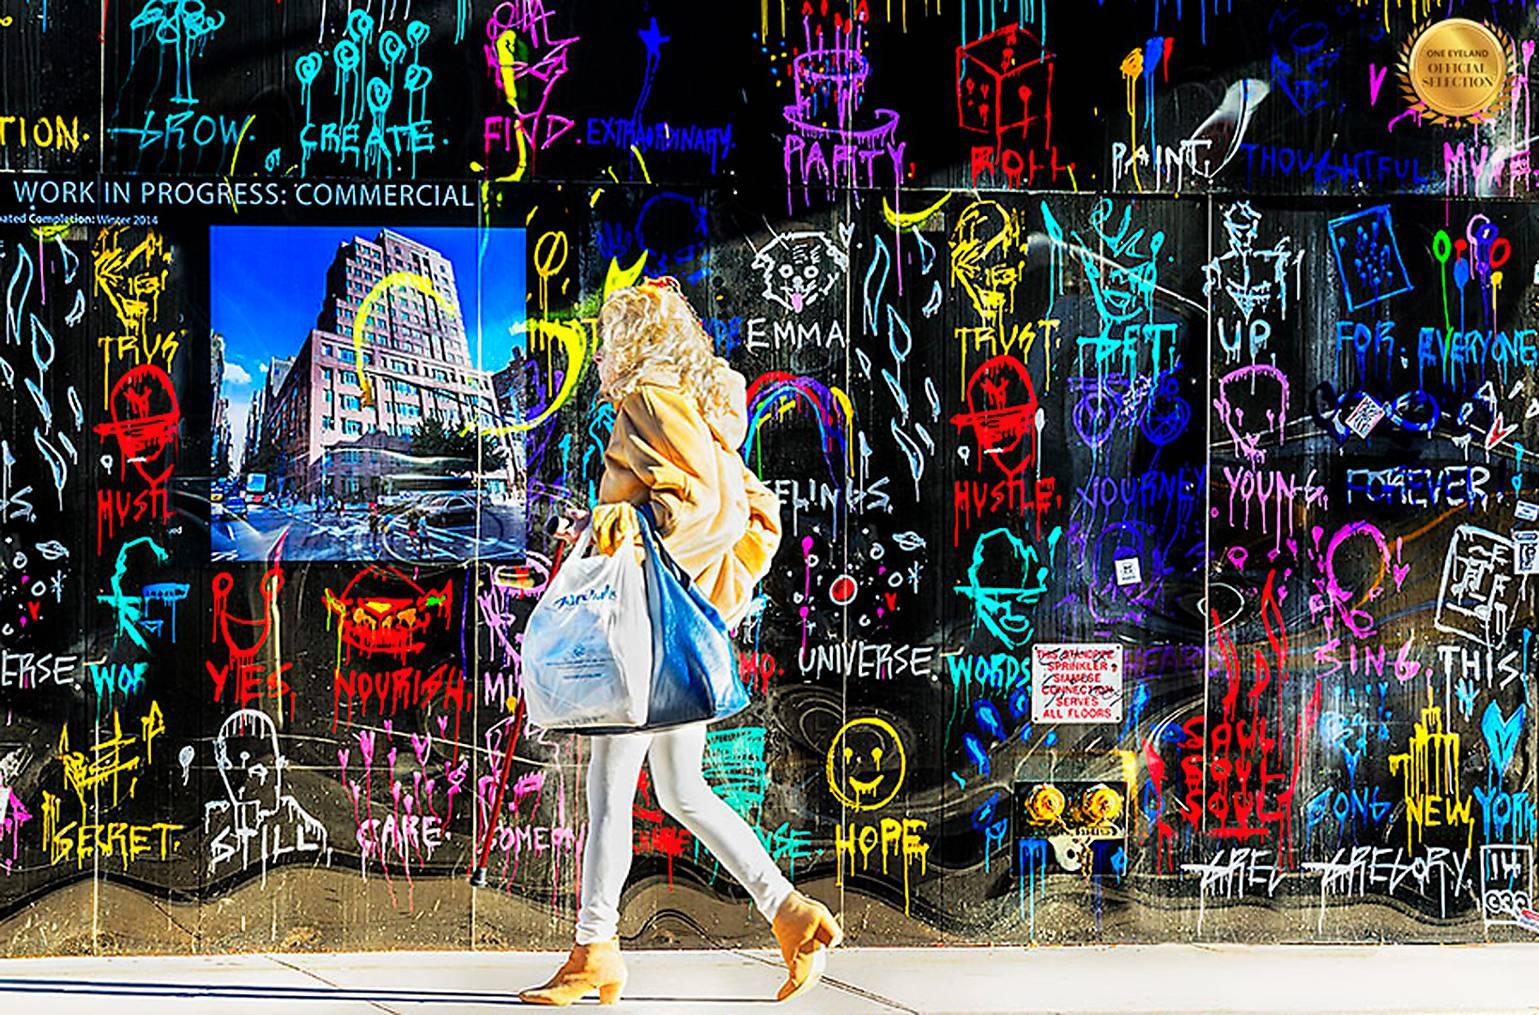 Mitchell Funk Abstract Photograph - Women in front of graffiti wall 